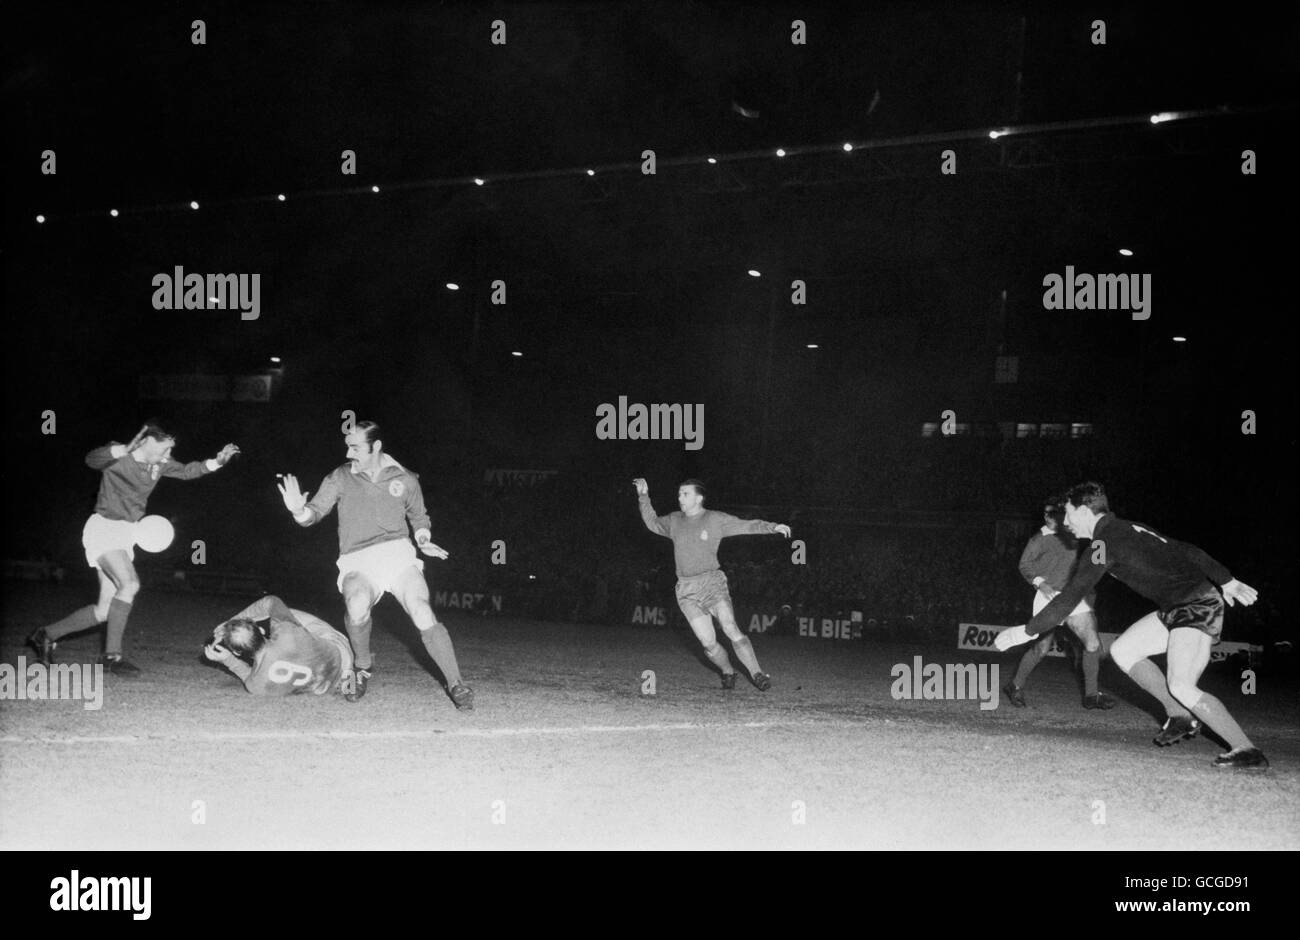 Benfica's Fernando Cruz (l) and Germano (3rd left) thwart Real Madrid's Alfredo Di Stefano (on floor) during an attack watched by Real Madrid's Ferenc Puskas (4th left) and Benfica goalkeeper Alberto da Costa Pereira (r). The game finished 5-3 to Benfica. Stock Photo